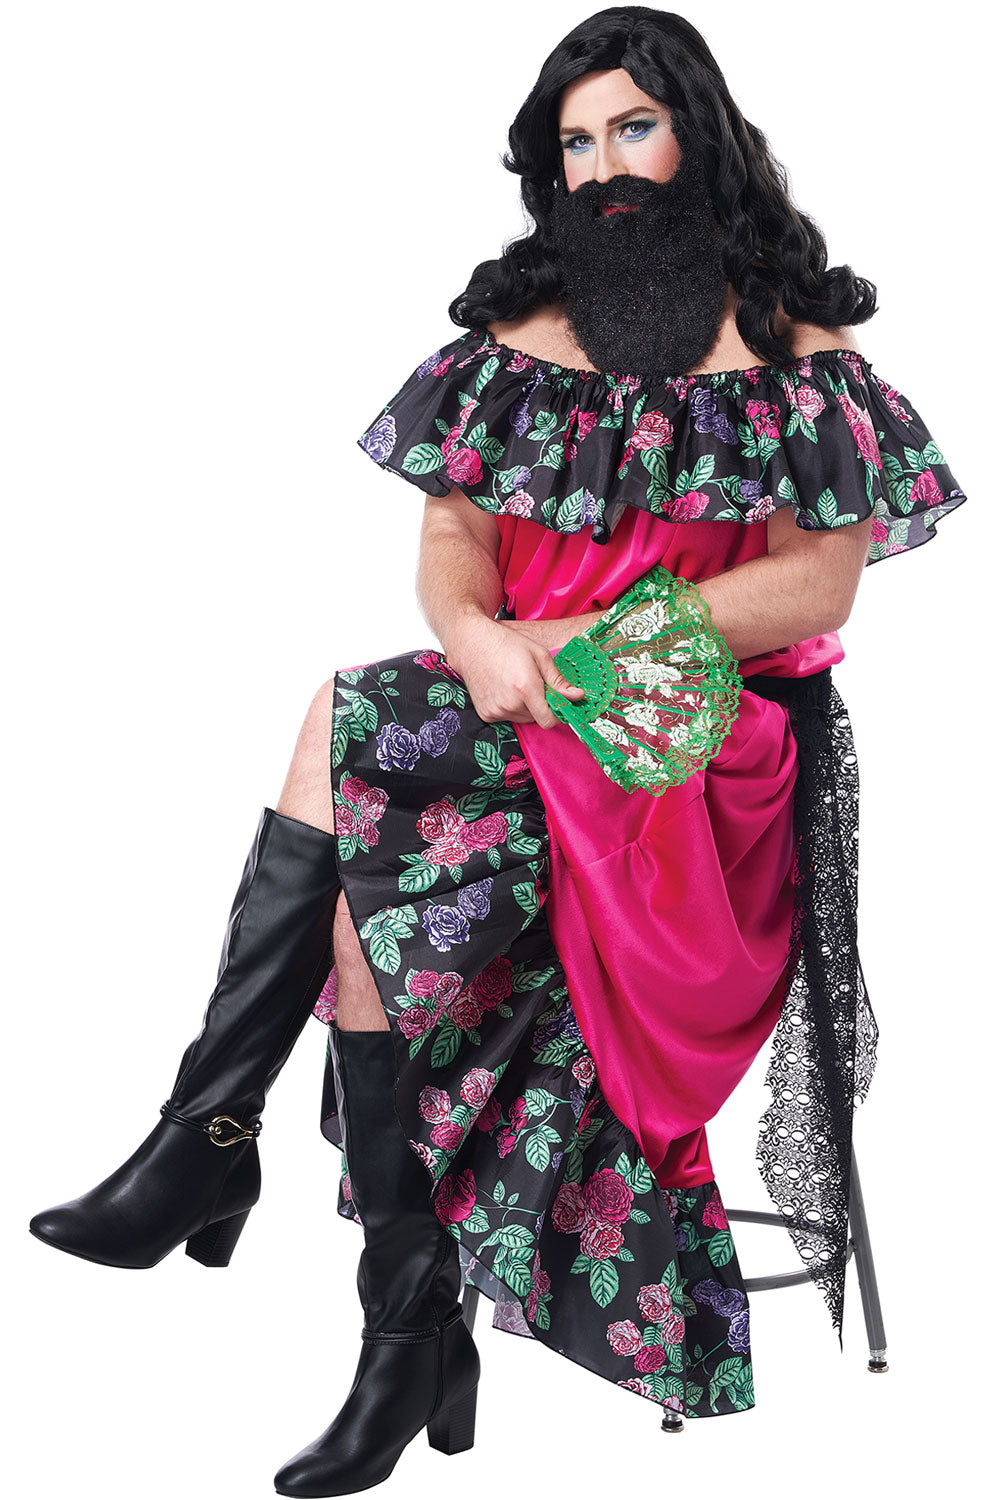 The Bearded Lady / Adult California Costume 5020/083